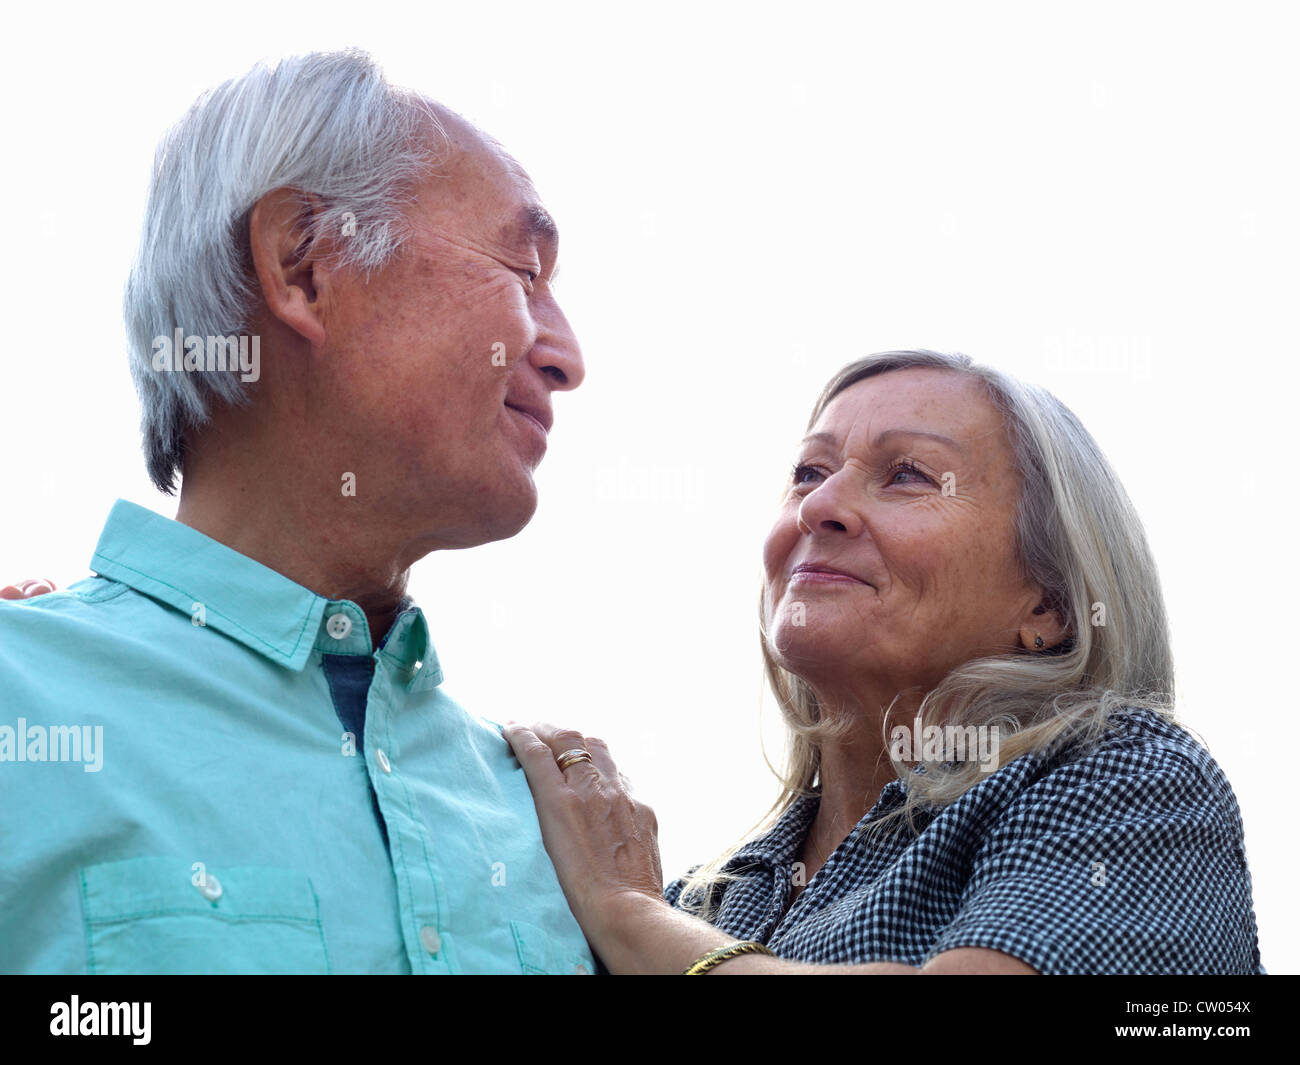 Older couple smiling together Stock Photo